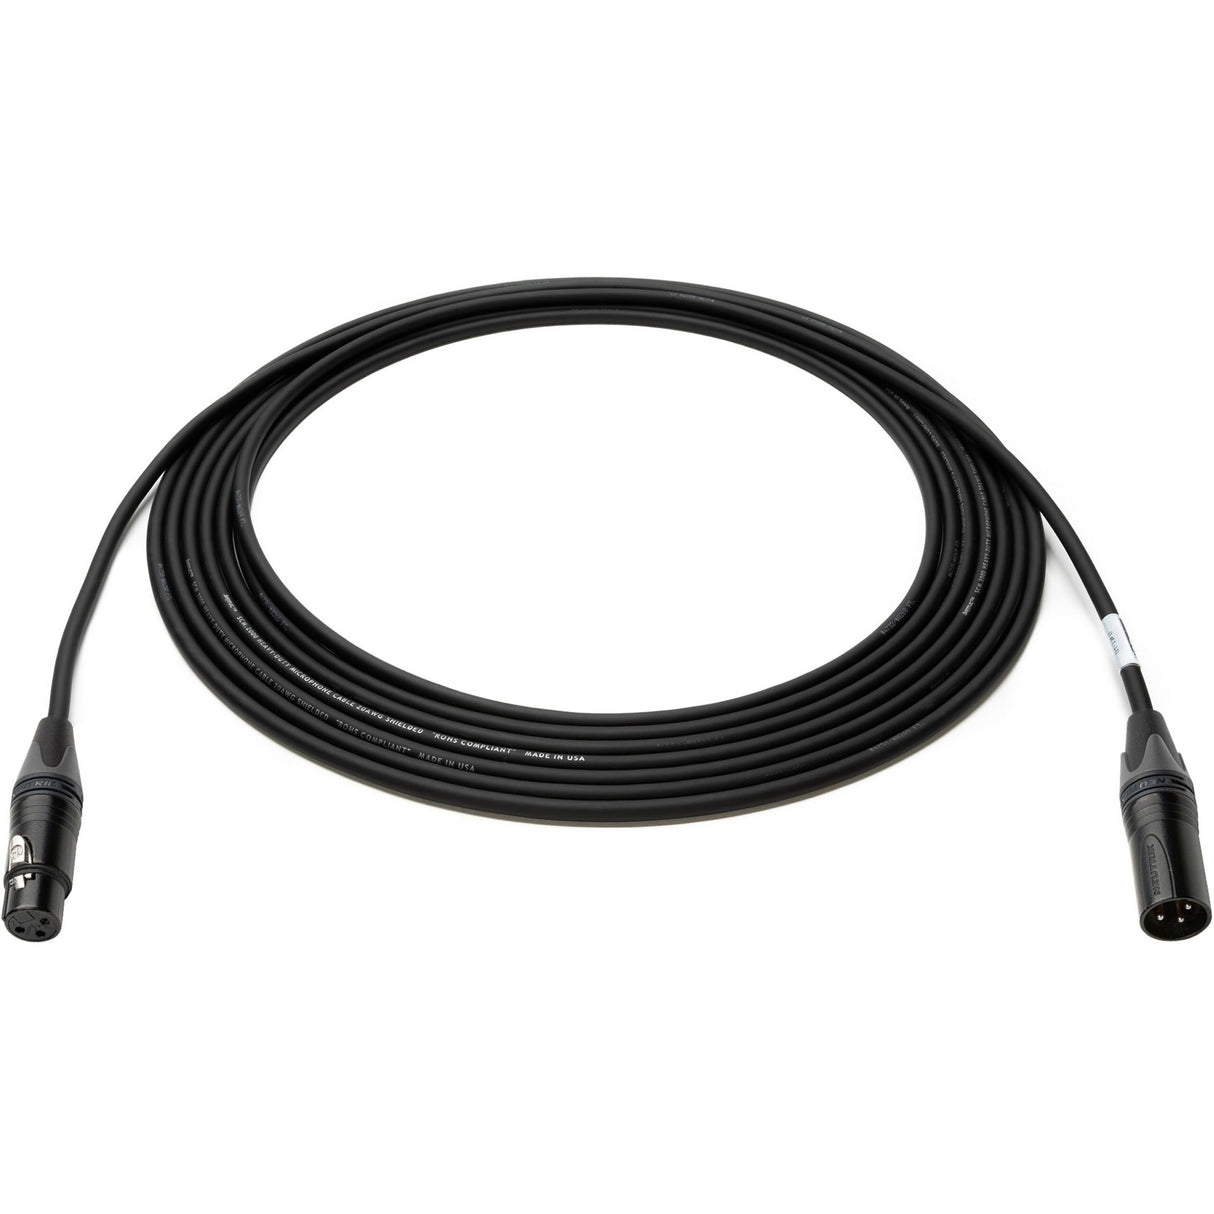 Sescom SCTX-XXJ-015 Touring Grade Microphone Cable with Neutrik Black and Silver 3-Pin XLR Connectors, 15-Foot